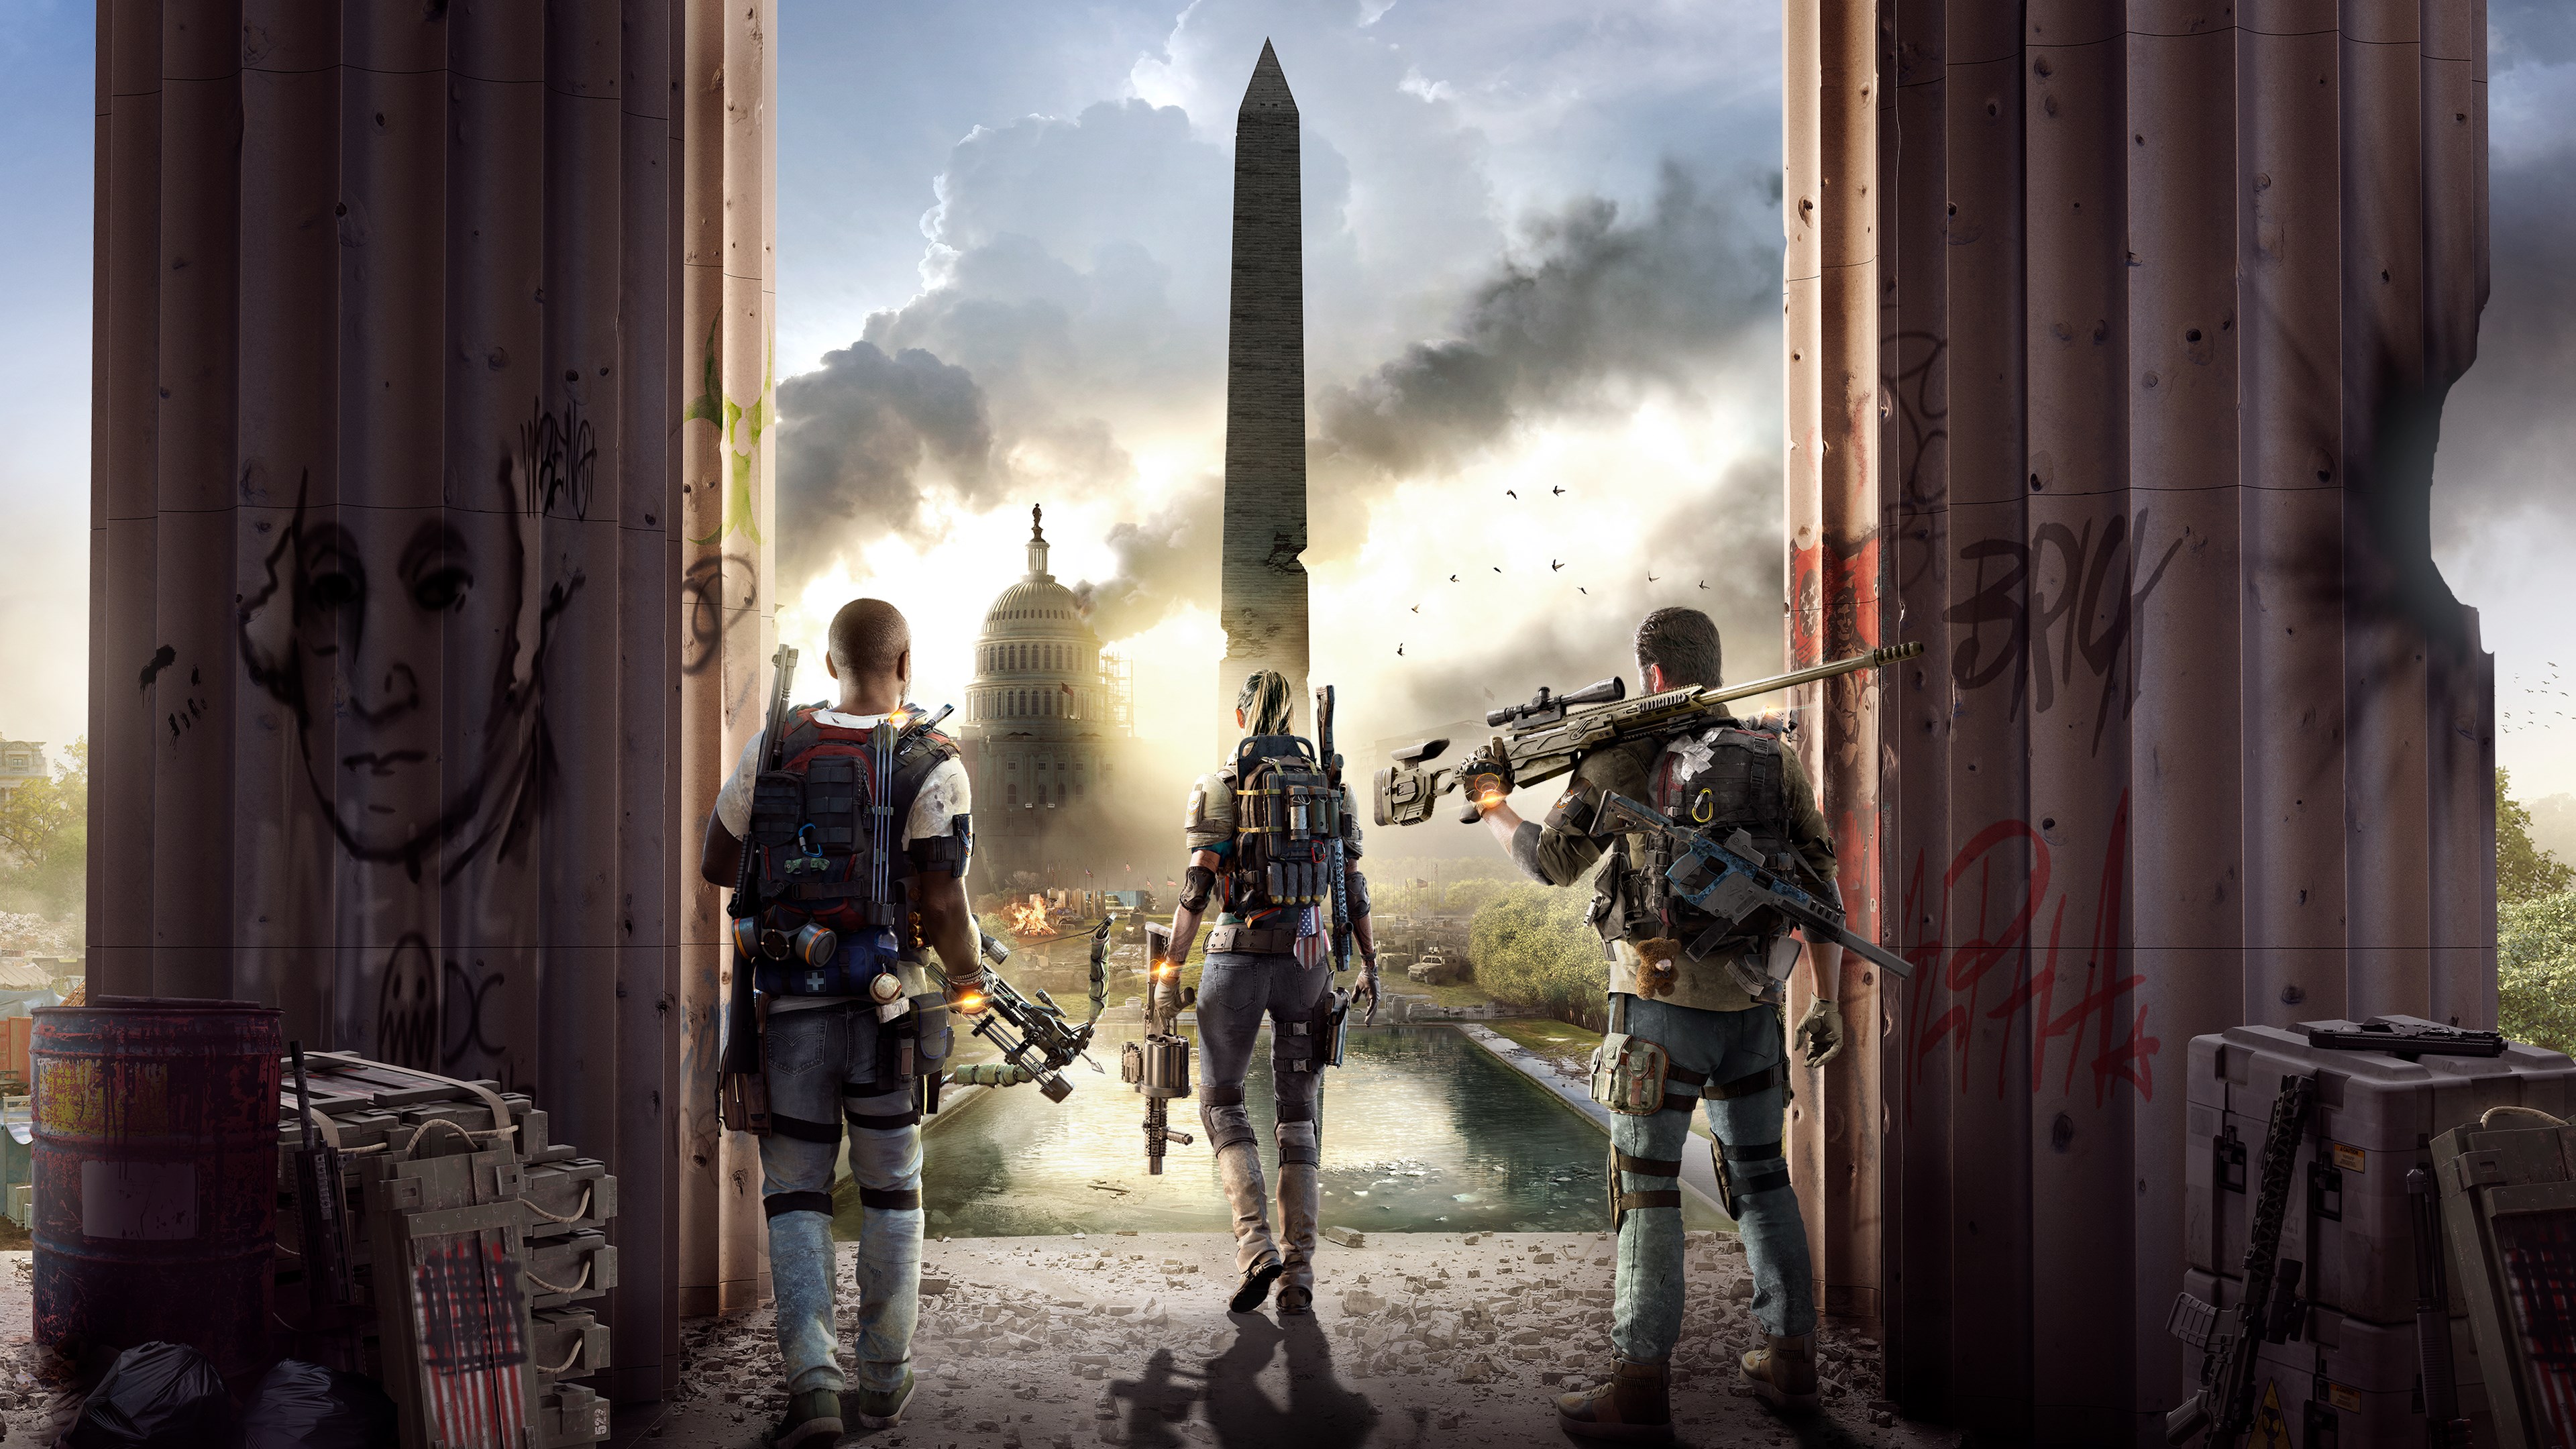 the division 2 xbox one digital